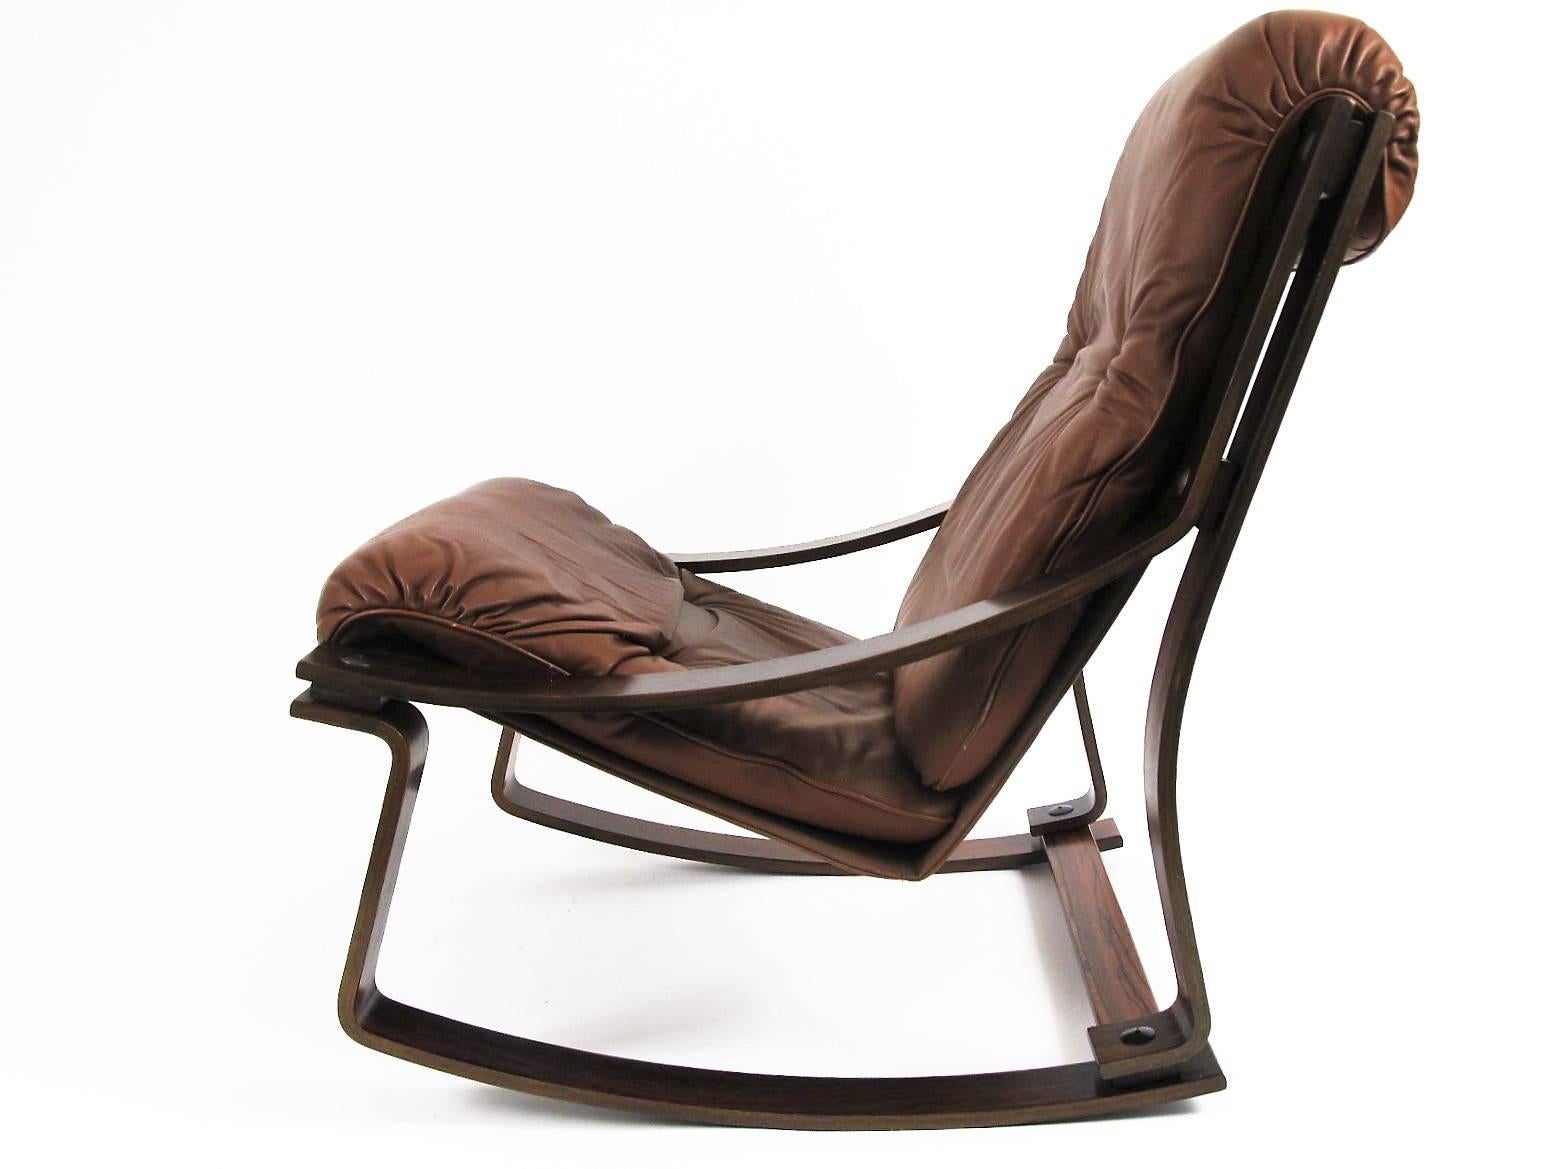 This is a somewhat rare chair from the Westnofa Furniture company in Norway. Made from rosewood veneered bent plywood with leather cushions.